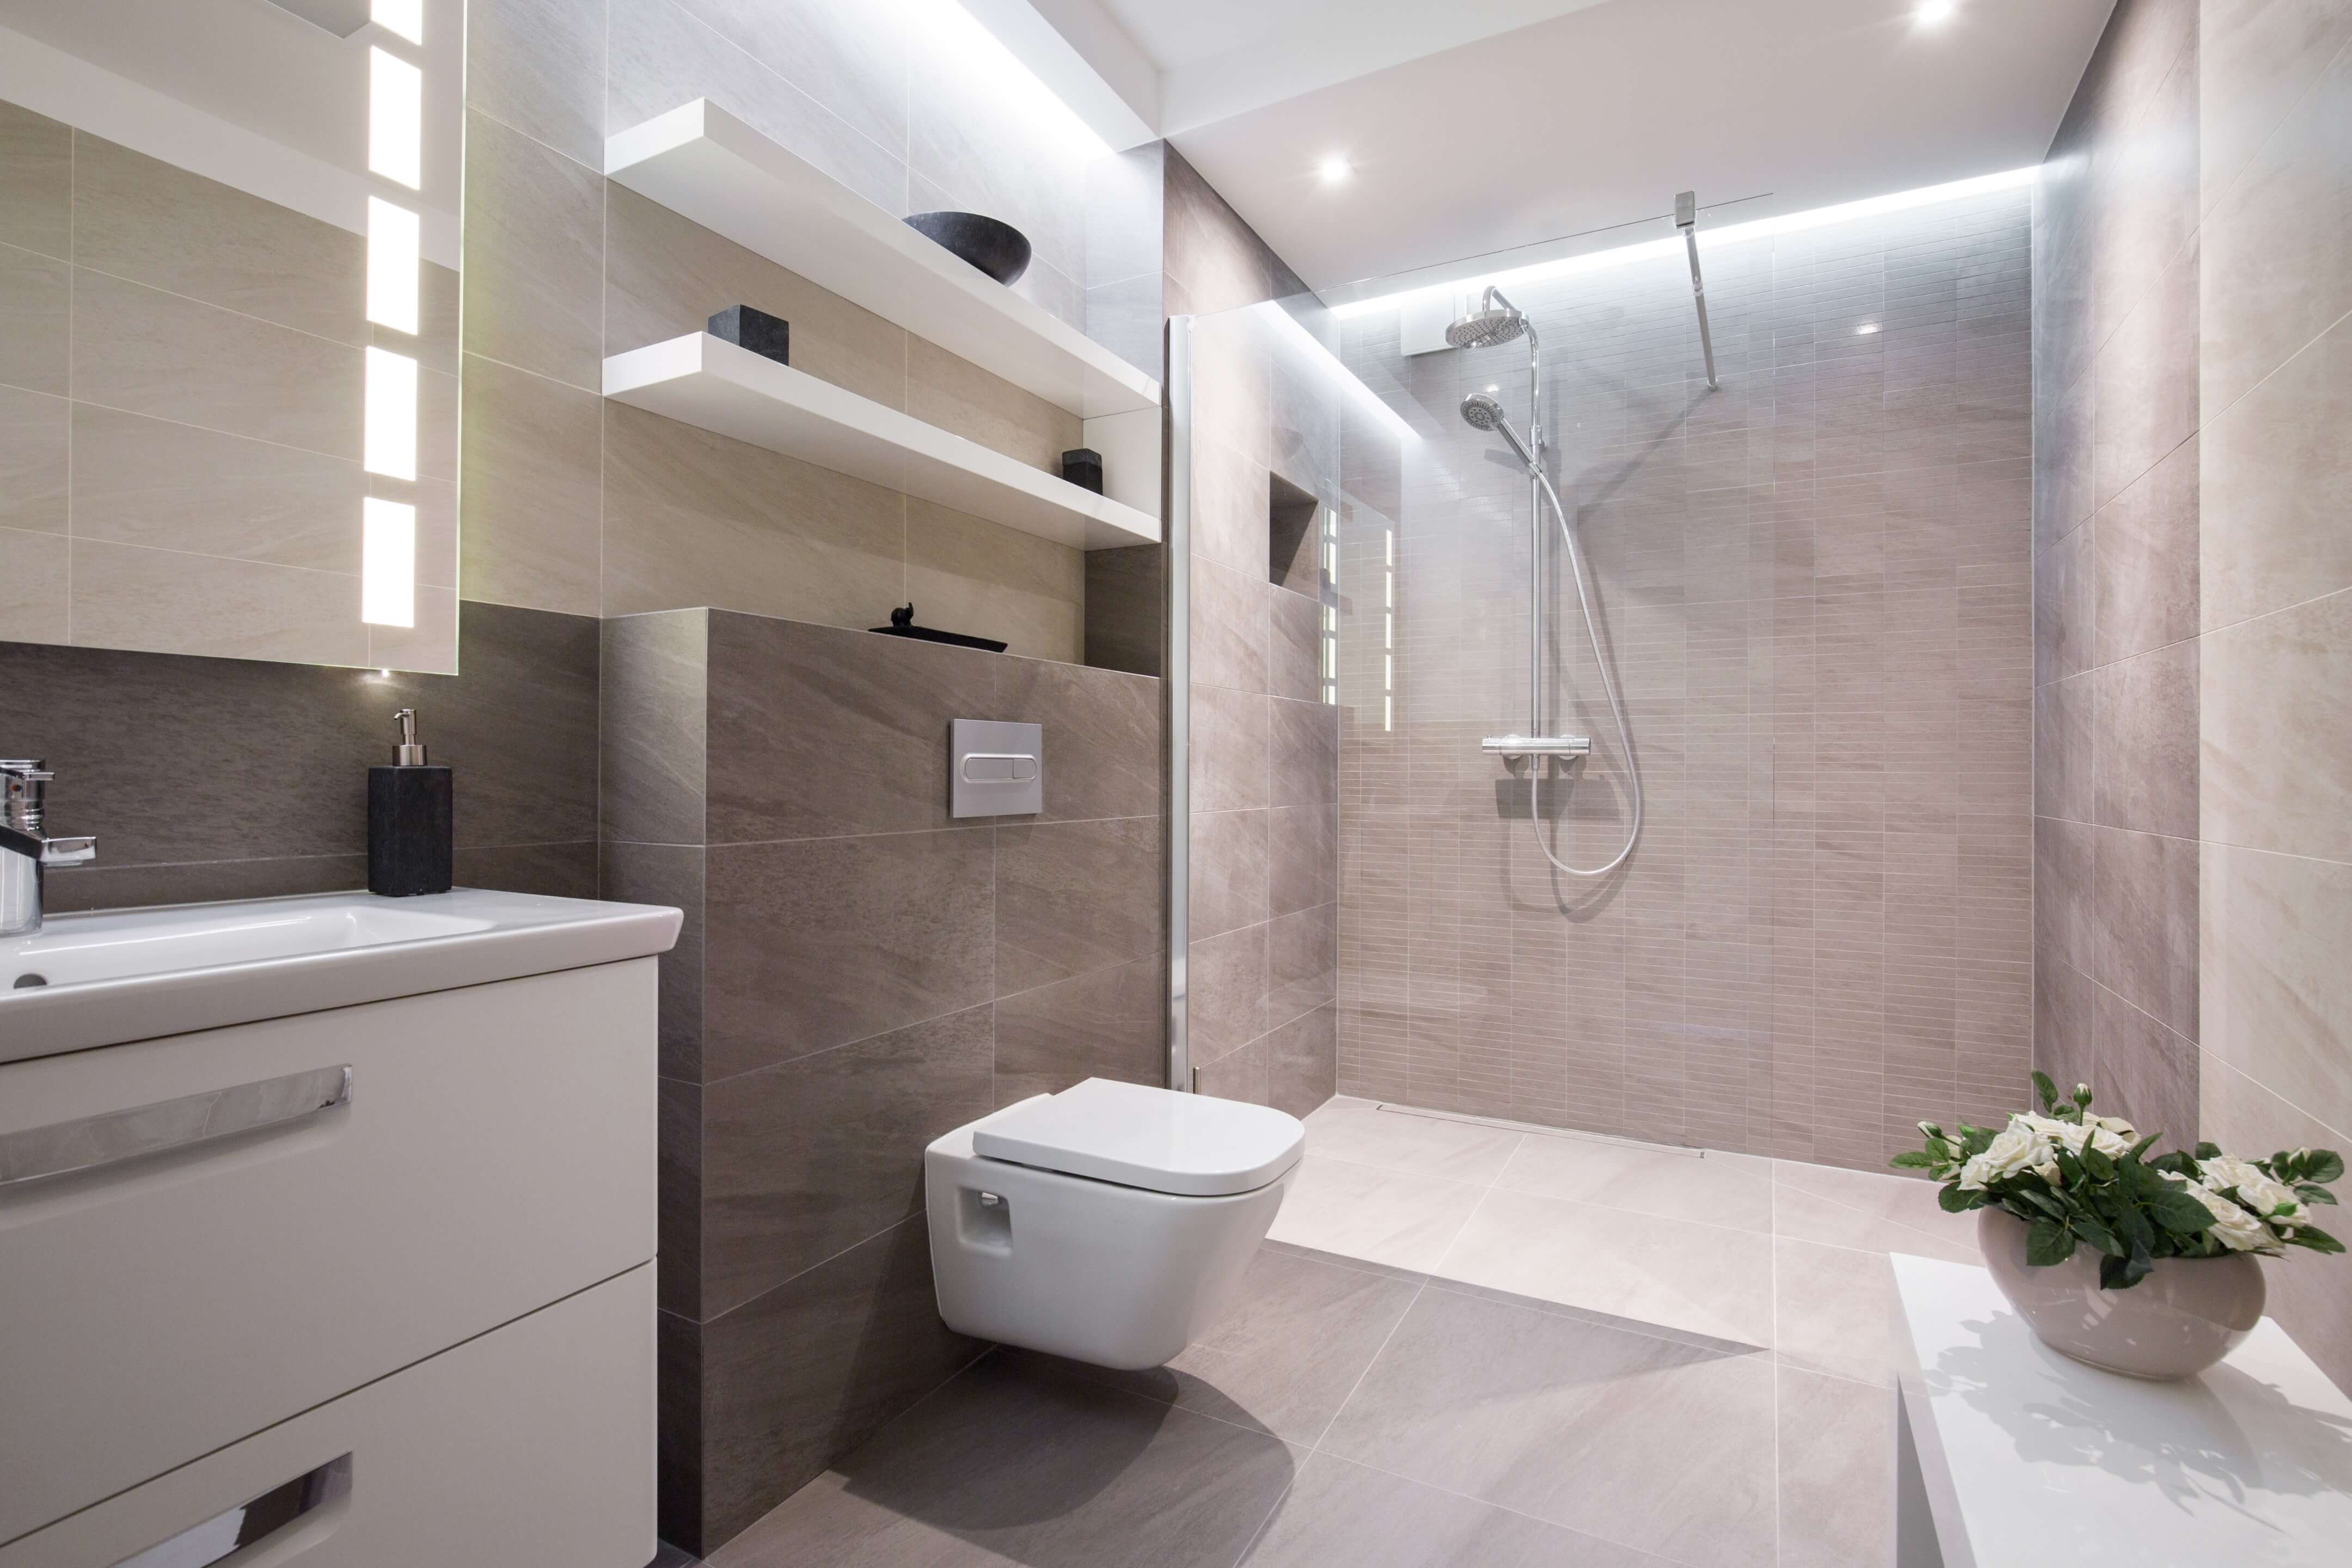 local bathroom fitters loughton